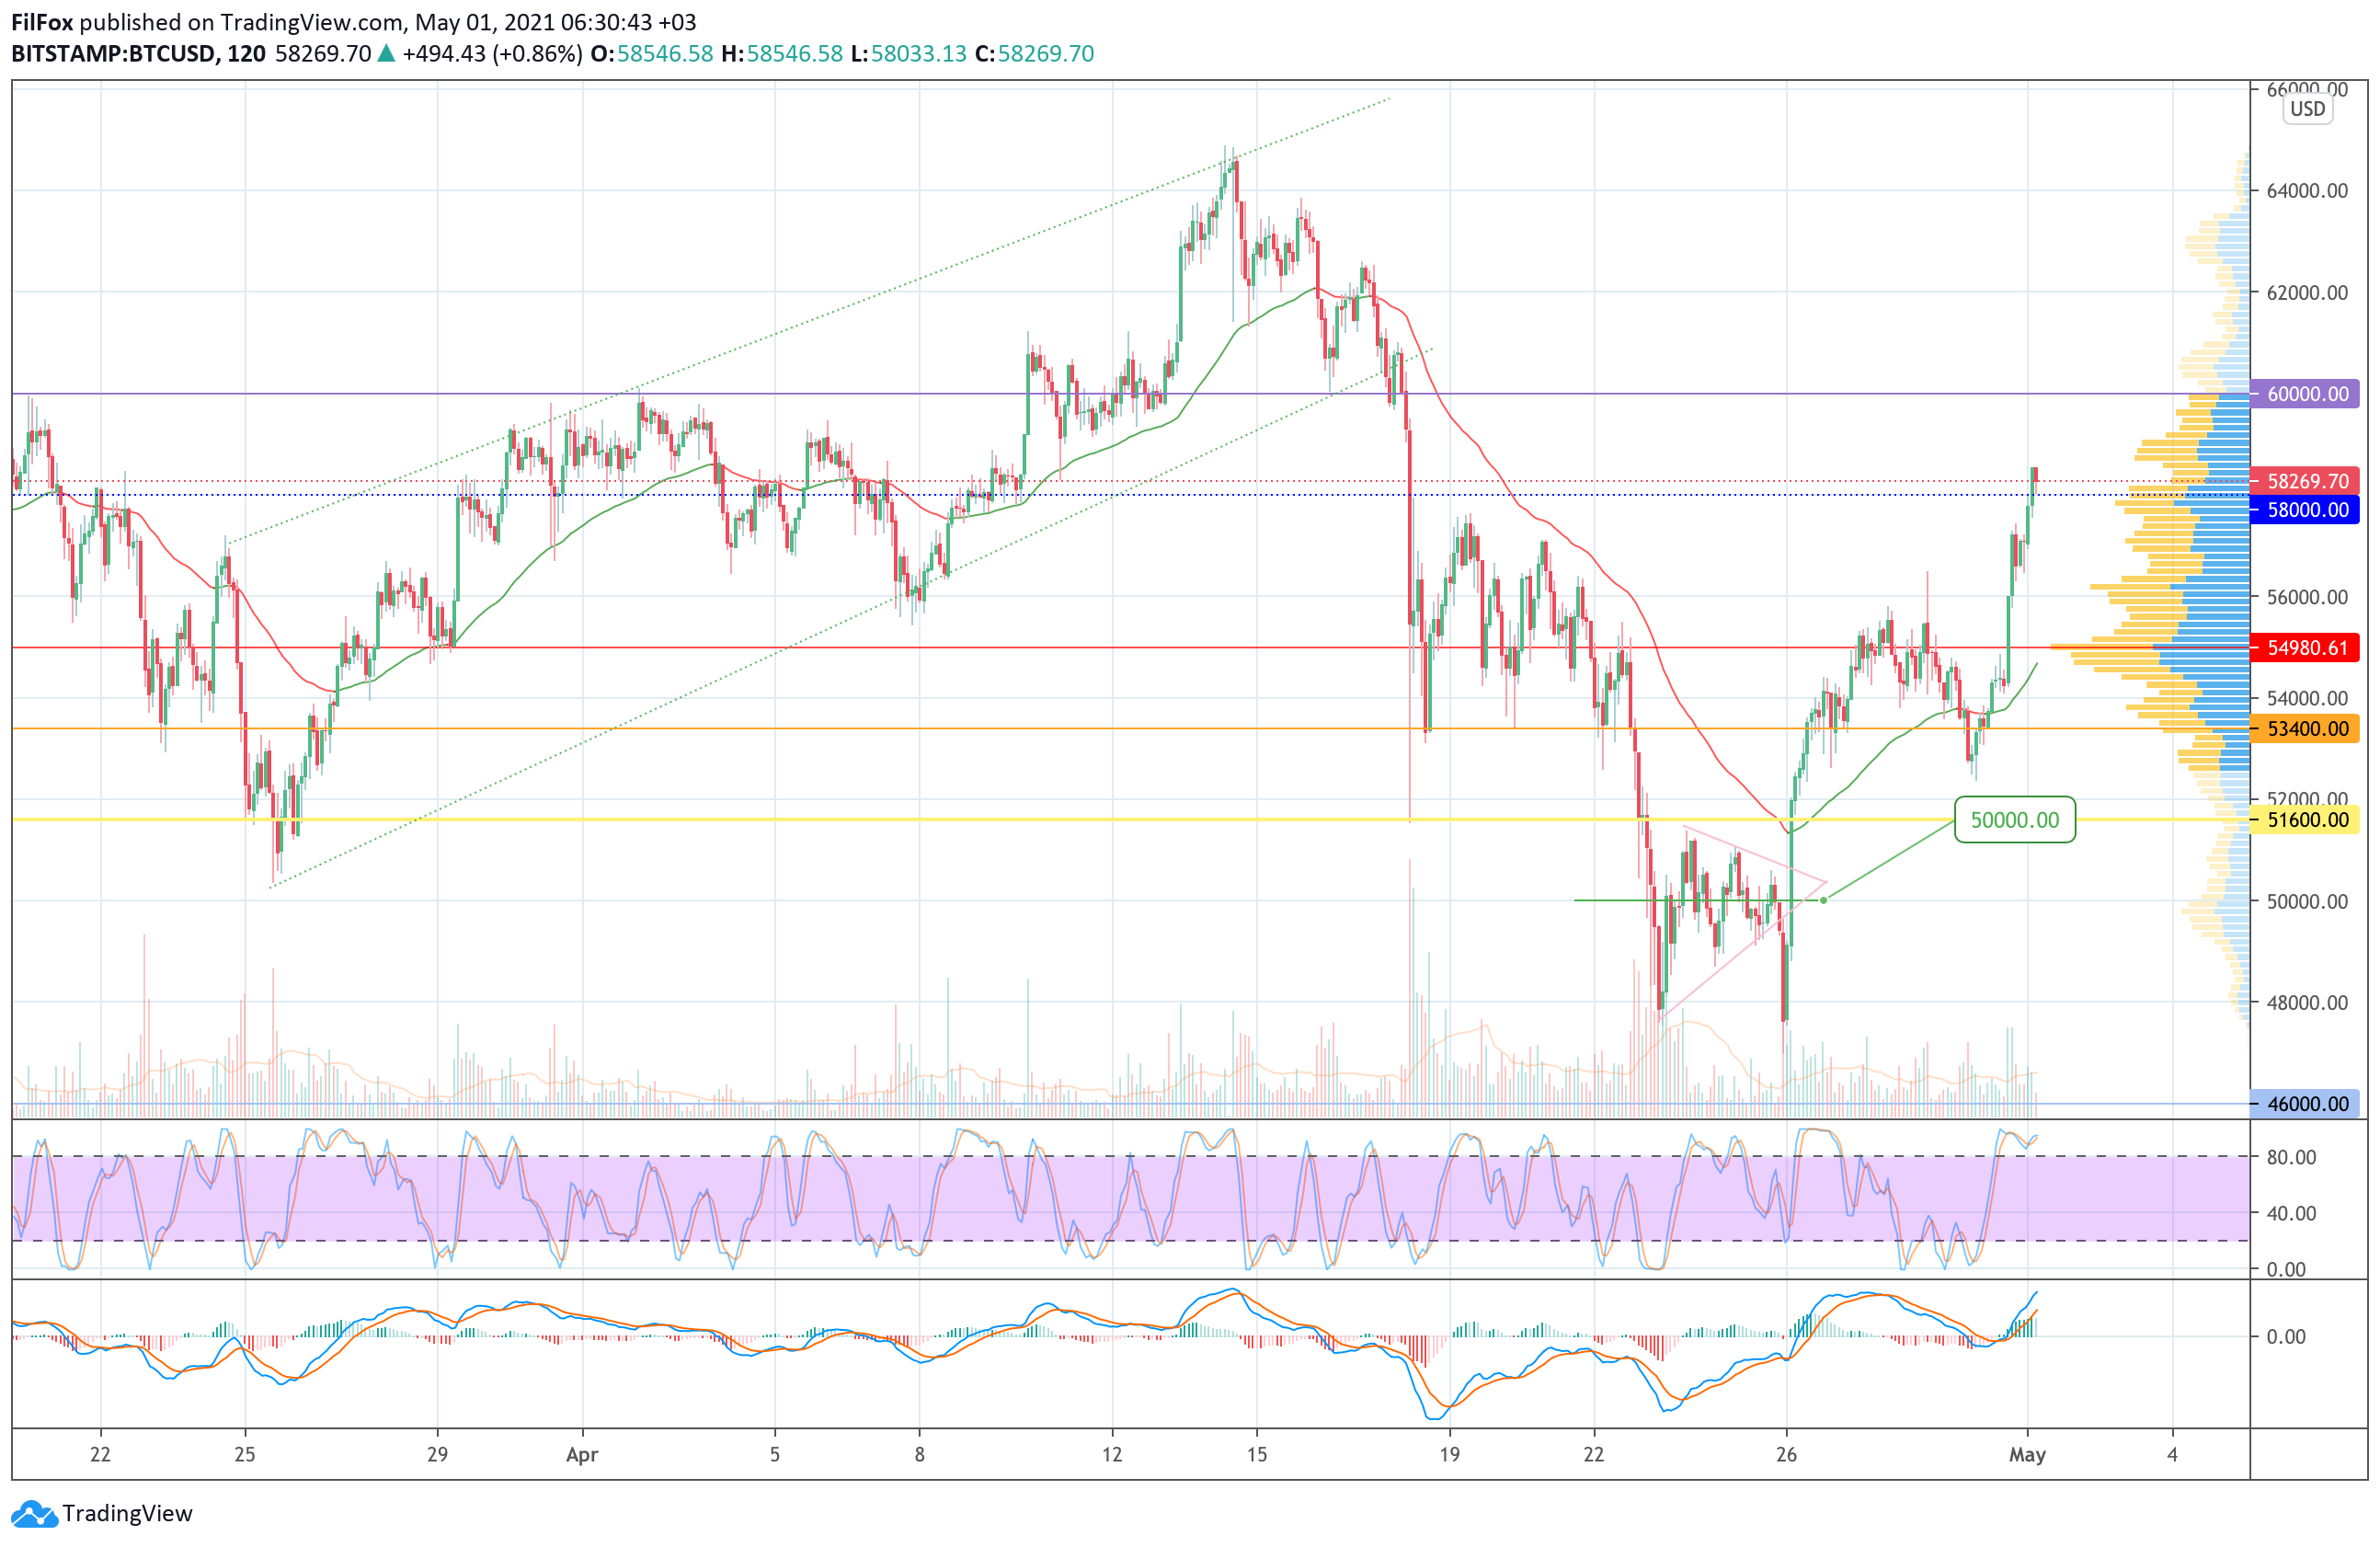 Analysis of the prices of Bitcoin, Ethereum, XRP for 05/01/2021